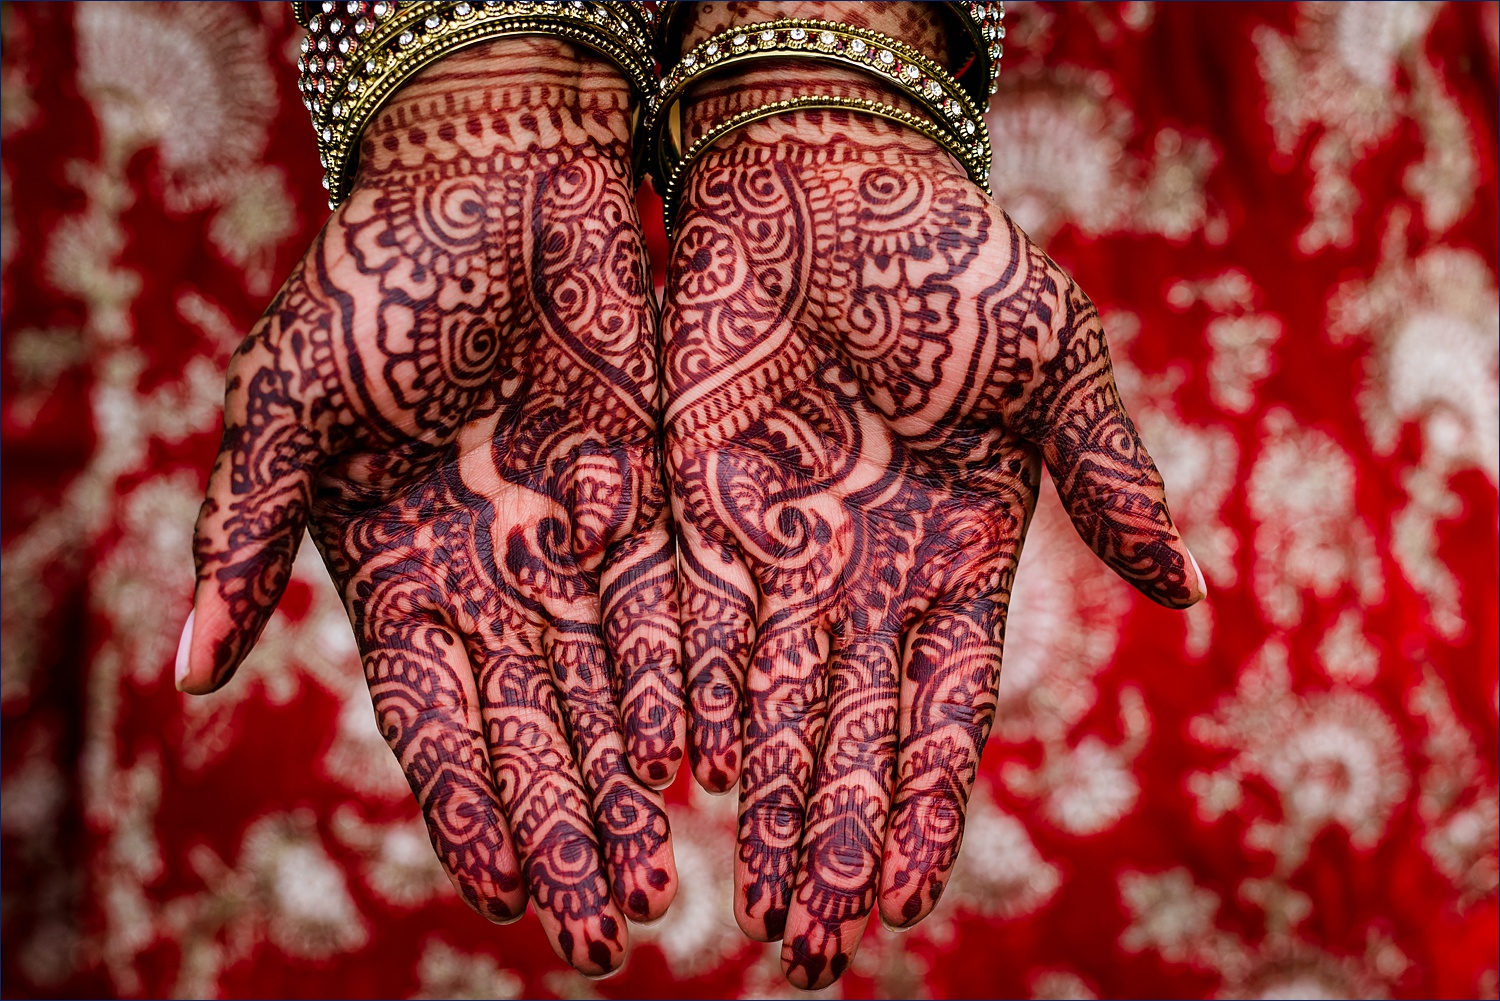 The bride's henna hands after the Hindu wedding ceremony